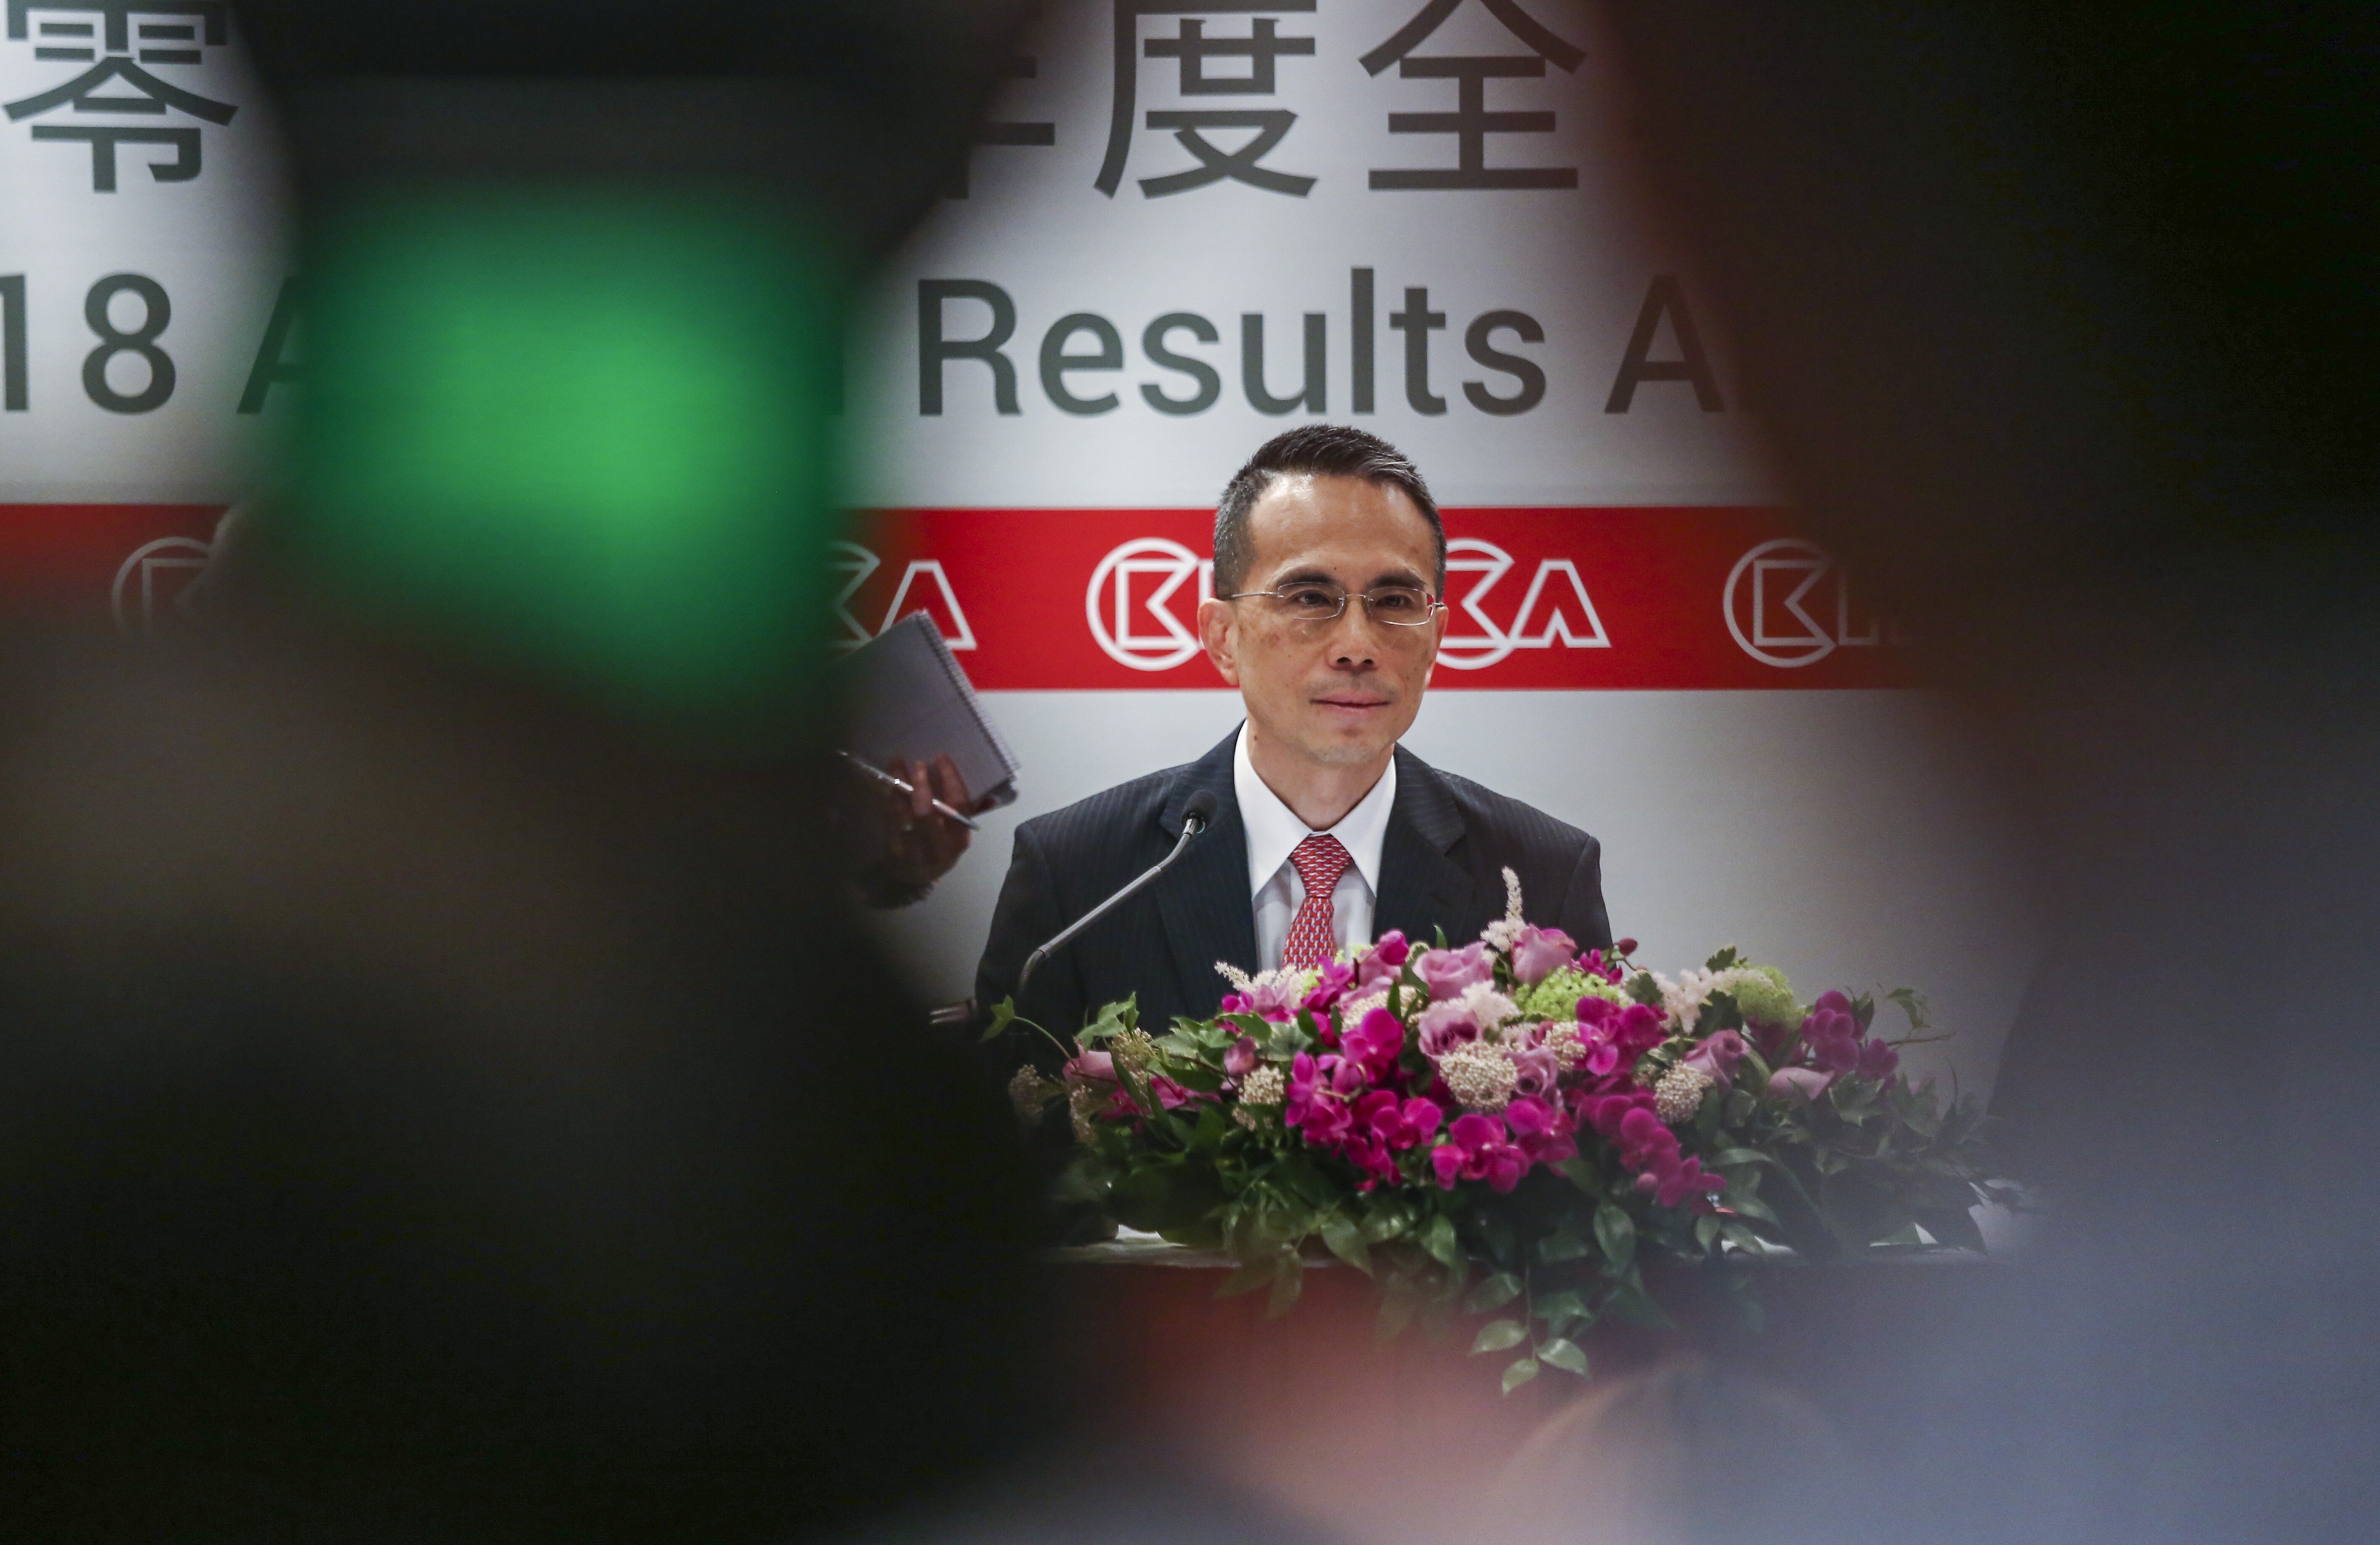 Victor Li Tzar-kuoi, Chairman and Group Co-Managing Director of CK Hutchison, during a media briefing in Central, Hong Kong in March 2019. Photo: Jonathan Wong